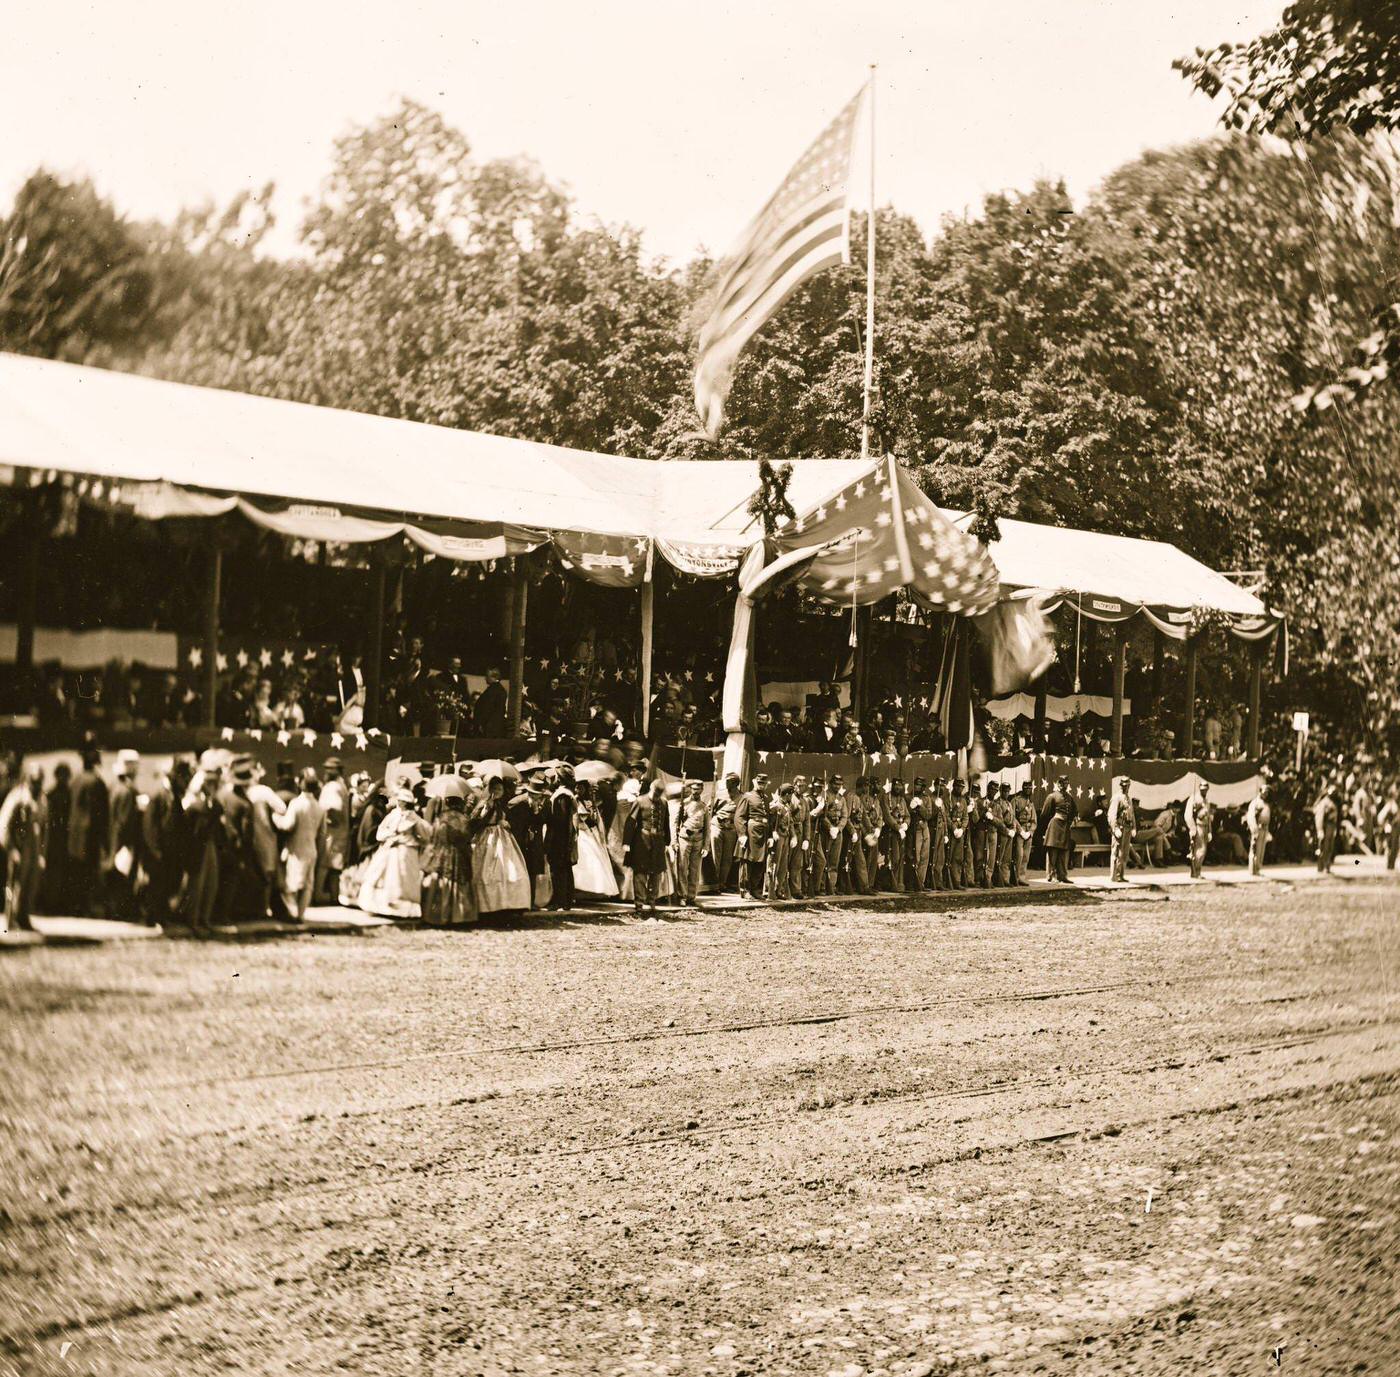 The grand review of the Army. Presidential reviewing stand, Washington, D.C., 1865